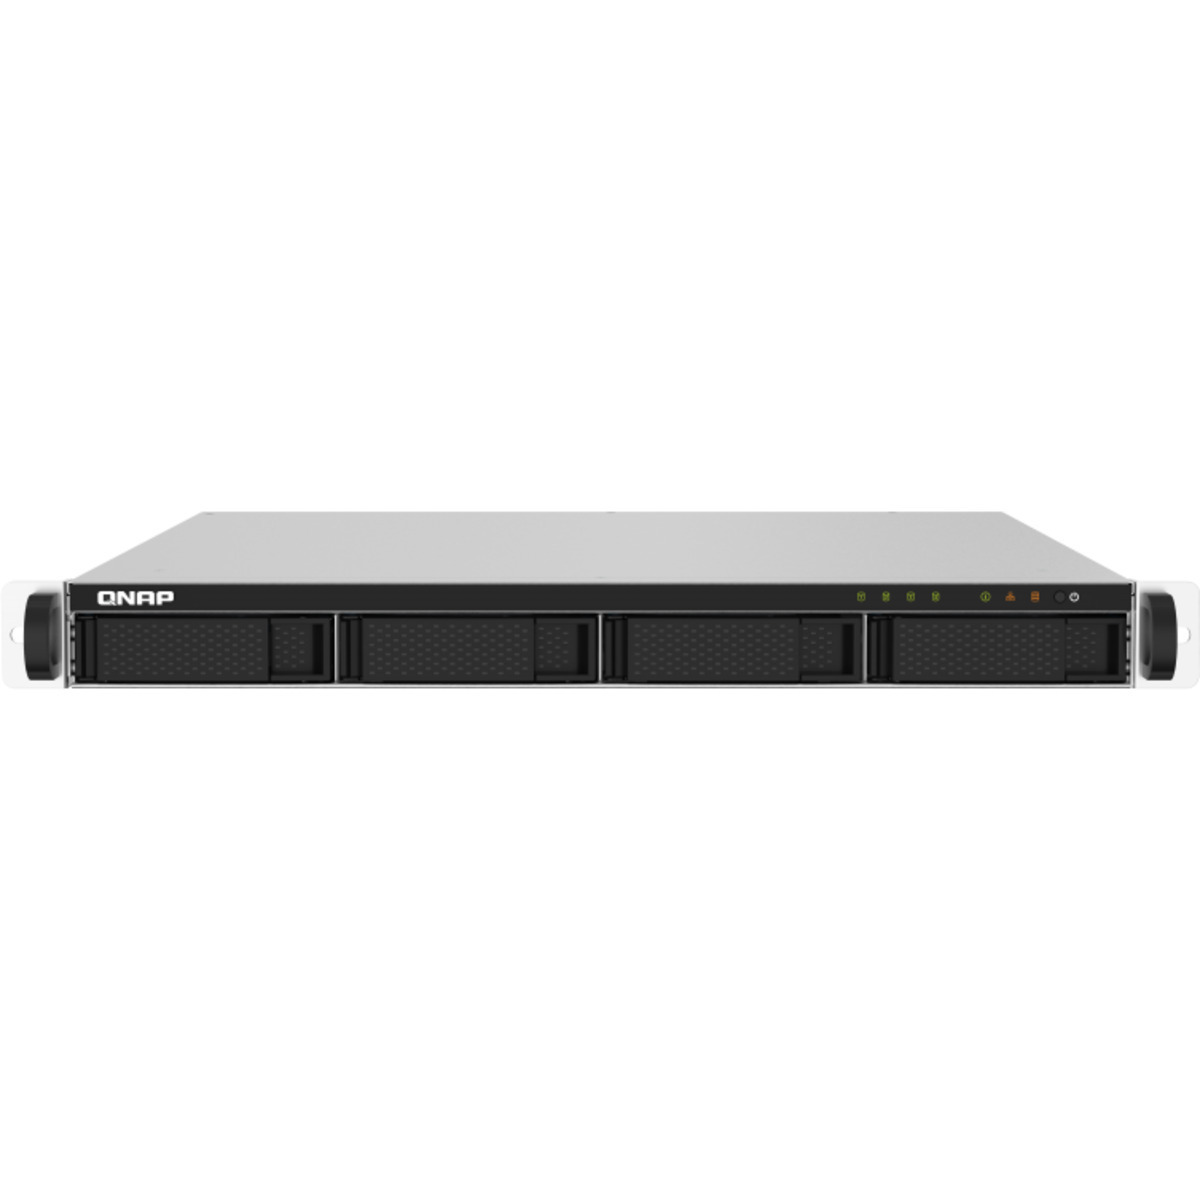 QNAP TS-432PXU 88tb 4-Bay RackMount Personal / Basic Home / Small Office NAS - Network Attached Storage Device 4x22tb Seagate EXOS X22 ST22000NM001E 3.5 7200rpm SATA 6Gb/s HDD ENTERPRISE Class Drives Installed - Burn-In Tested - FREE RAM UPGRADE TS-432PXU